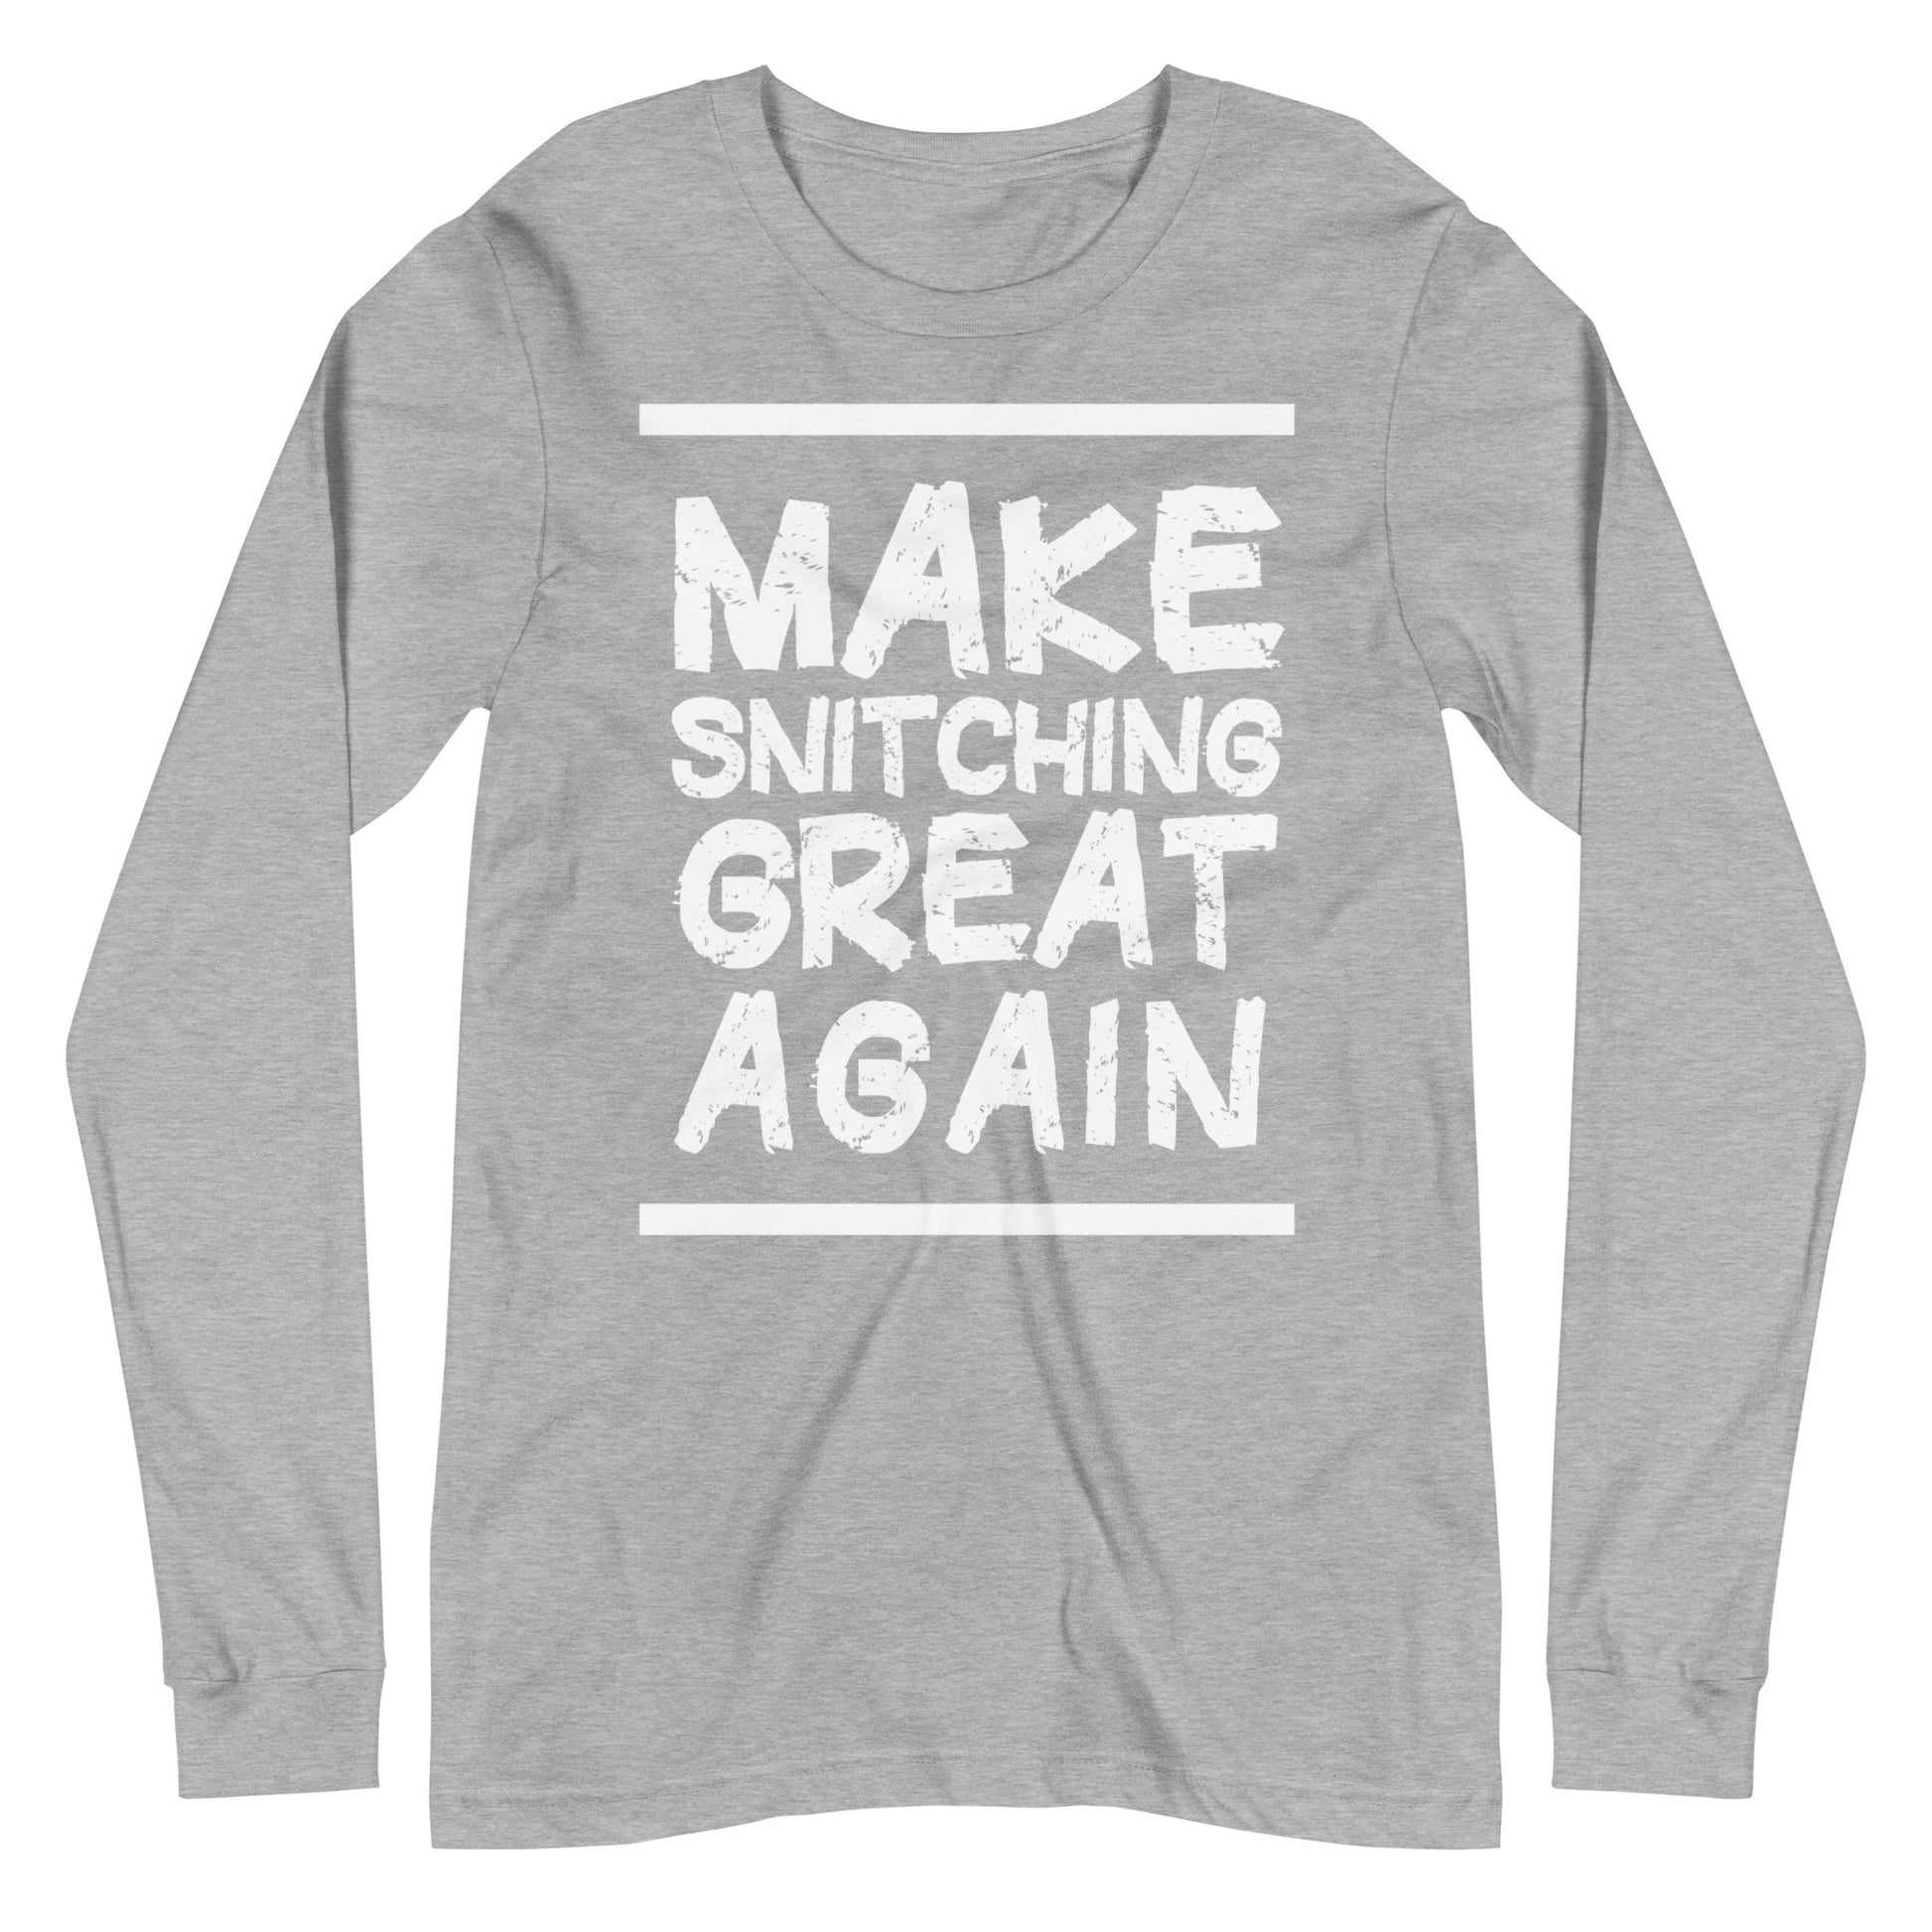 Make Snitching Great Again Motto Long Sleeve T-shirt - Make Snitching Great Again